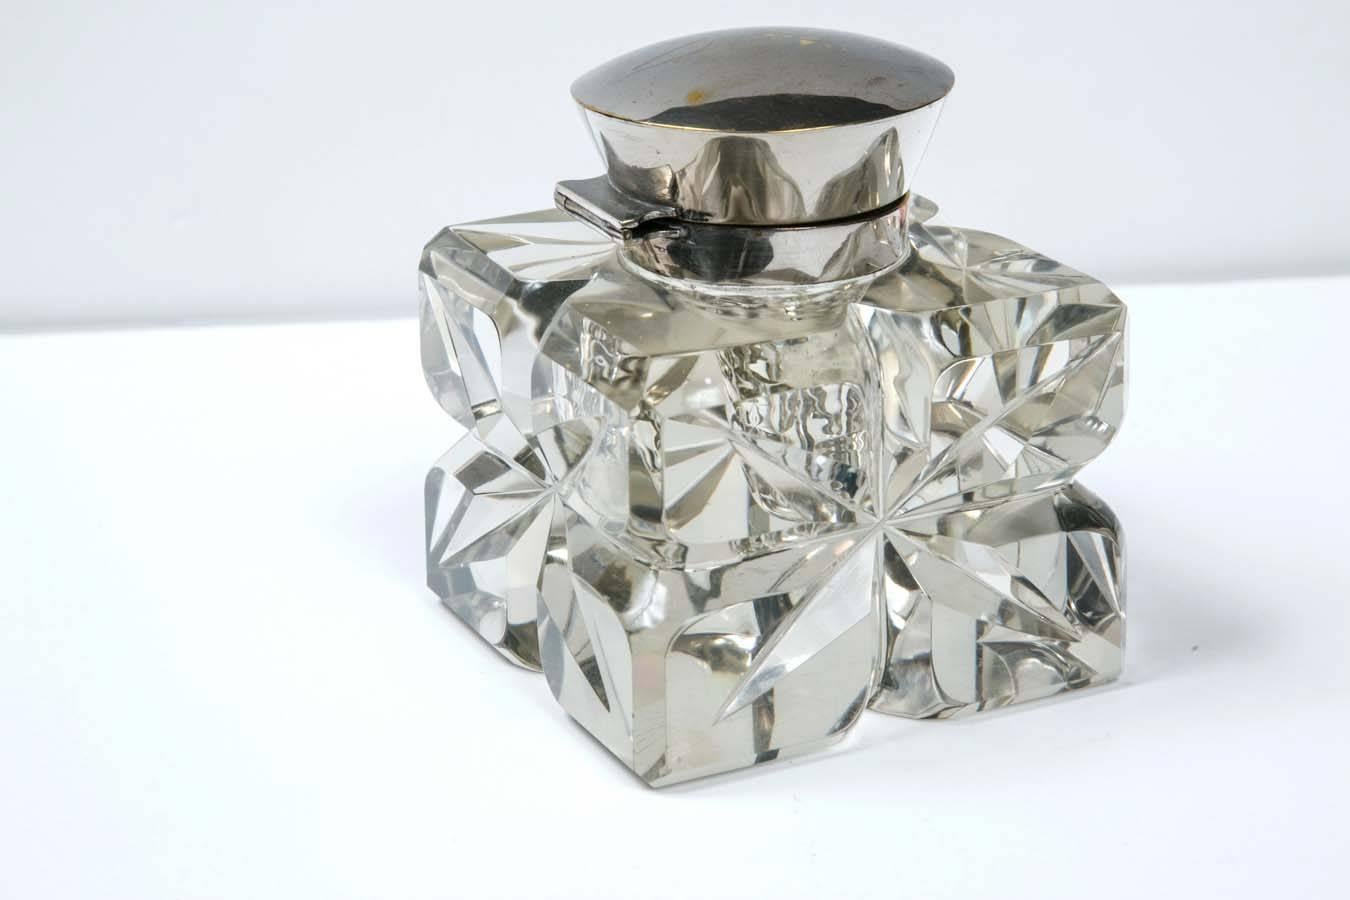 Crystal Antique American Inkwell with Starburst Pattern, 1906